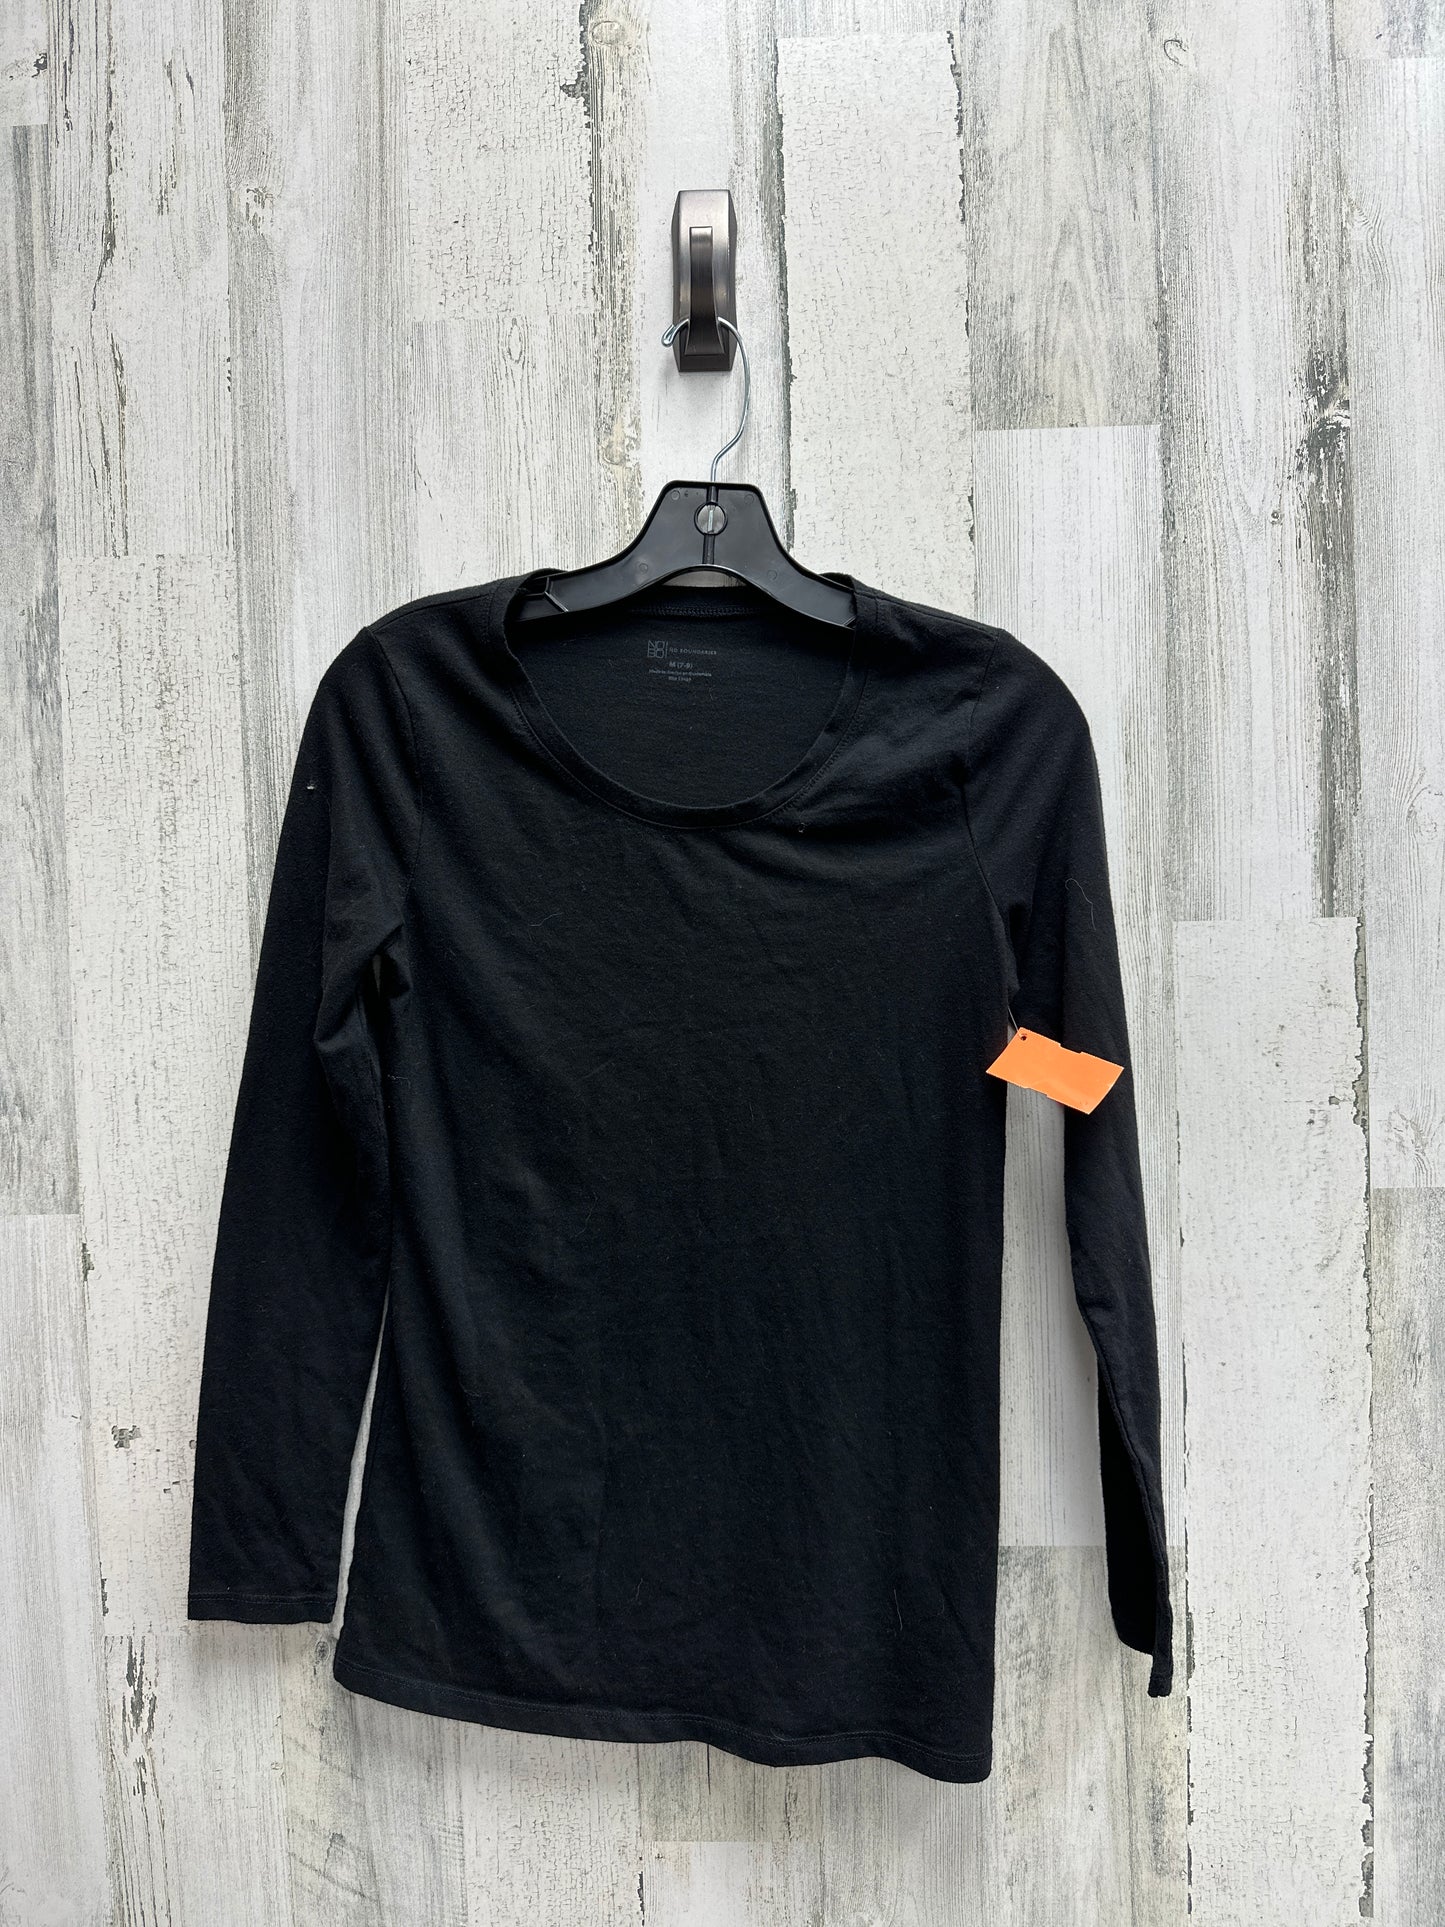 Top Long Sleeve By No Boundaries  Size: M